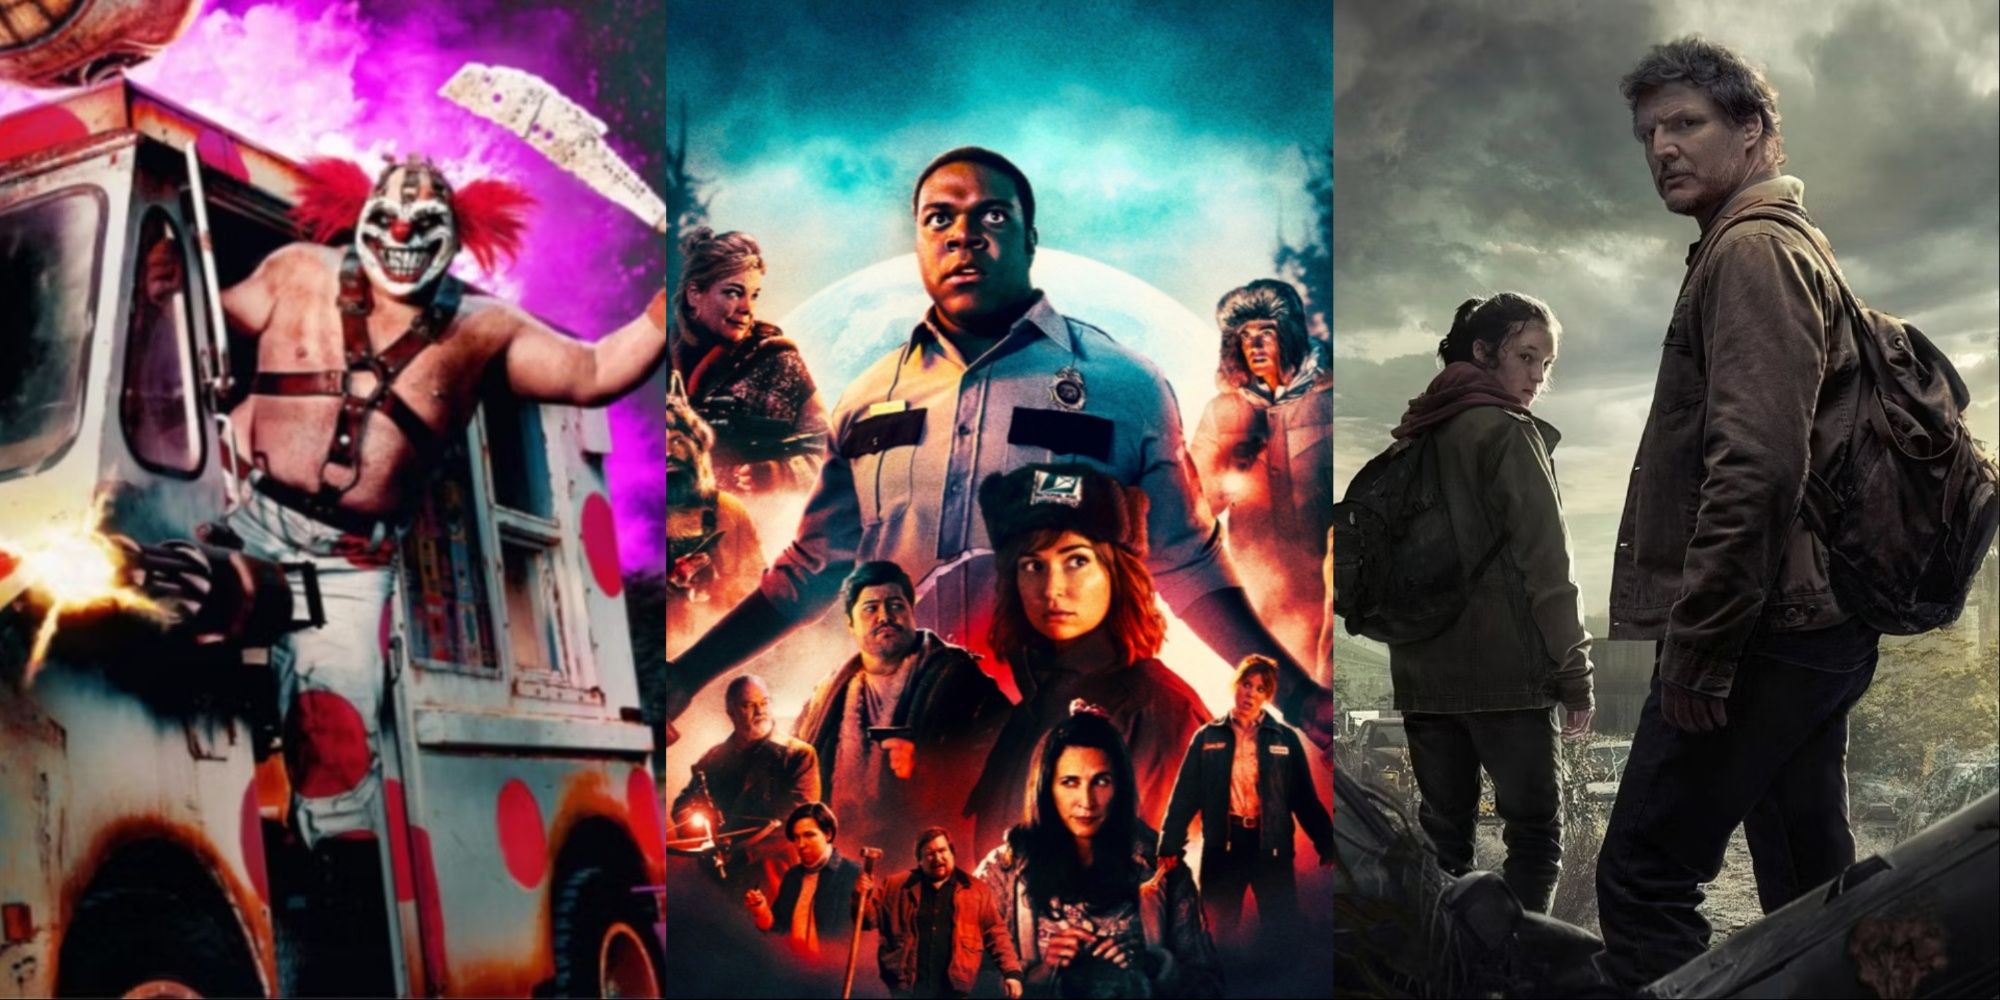 A three-image collage of Samoa Joe's Sweet Tooth with a machete in his ice cream truck in Twisted Metal, the movie poster for Werewolves Within, and Bella Ramsey and Pedro Pascal as Joel and Ellie on HBO's The Last of Us poster.